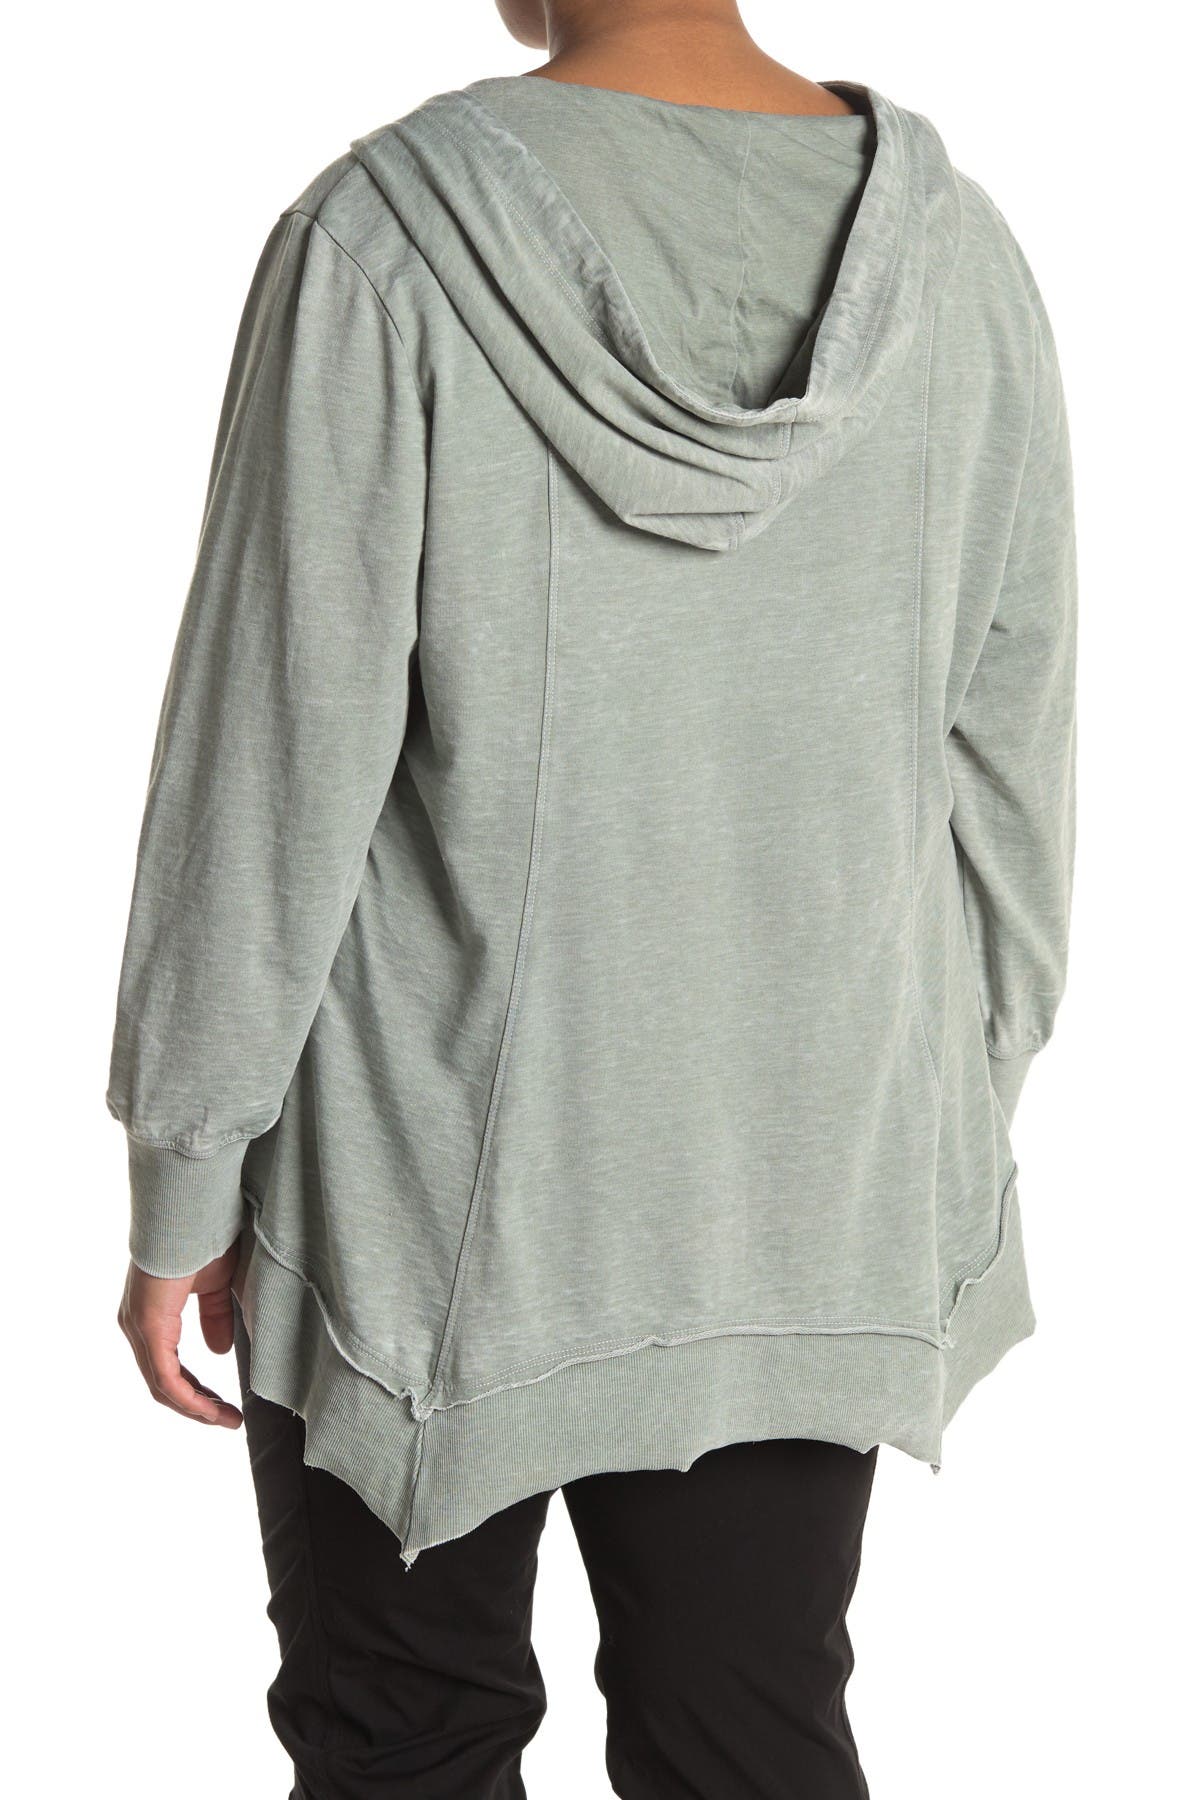 Women/’s Pullover Fleece Hoodie with Pockets Thermal Solid Sweater Coat Fall Winter Tunics Outerwear Plus Size.M-5XL